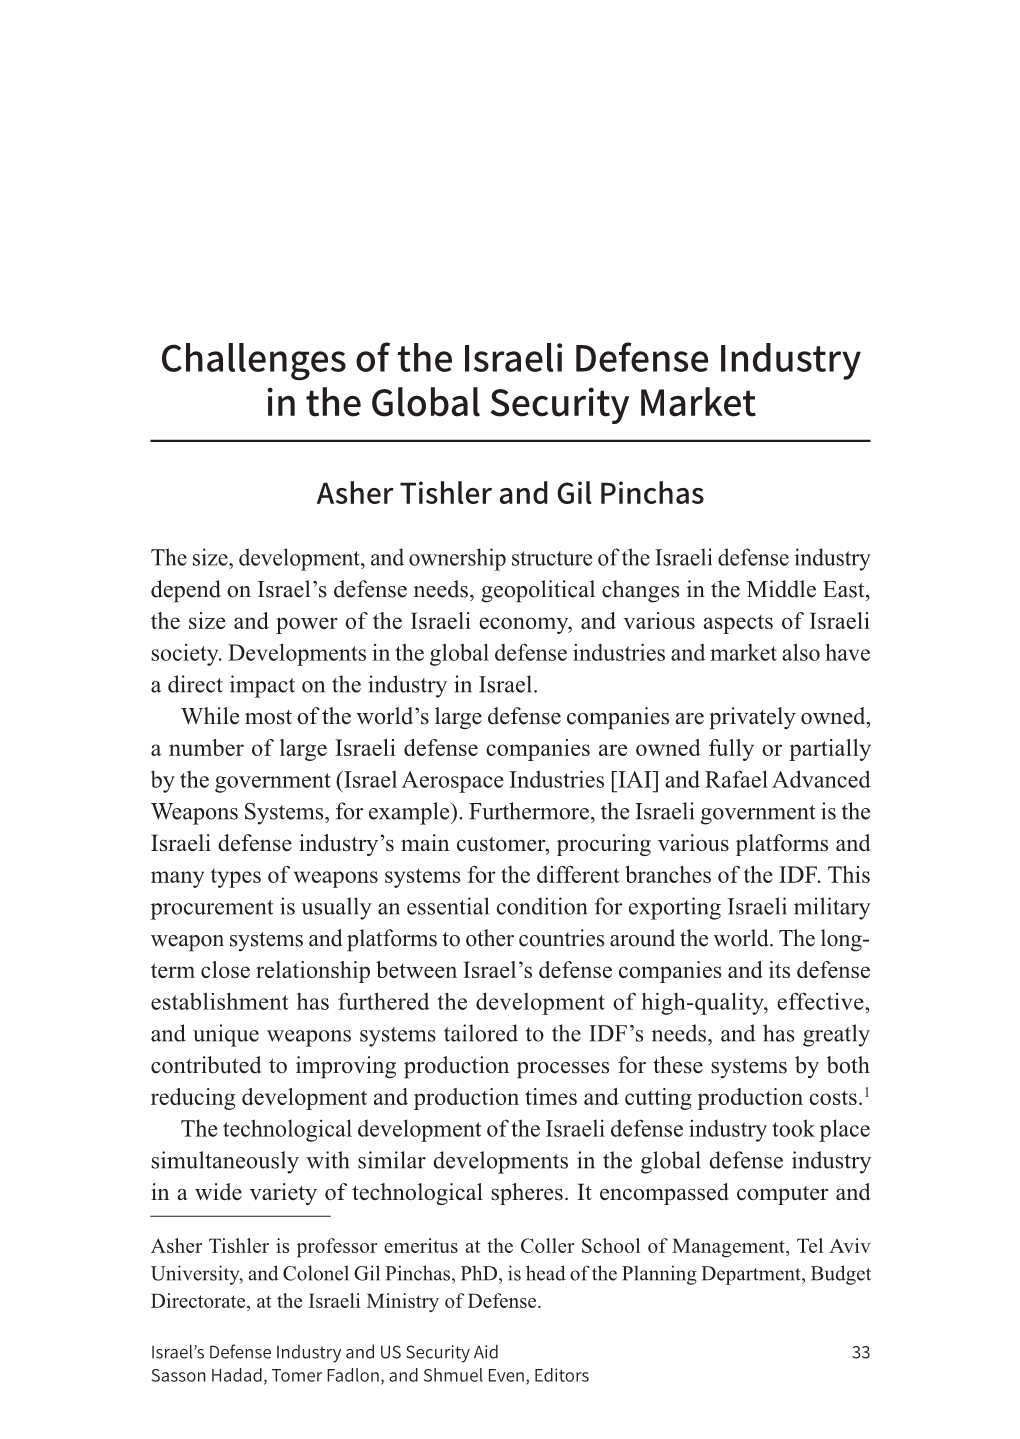 Challenges of the Israeli Defense Industry in the Global Security Market